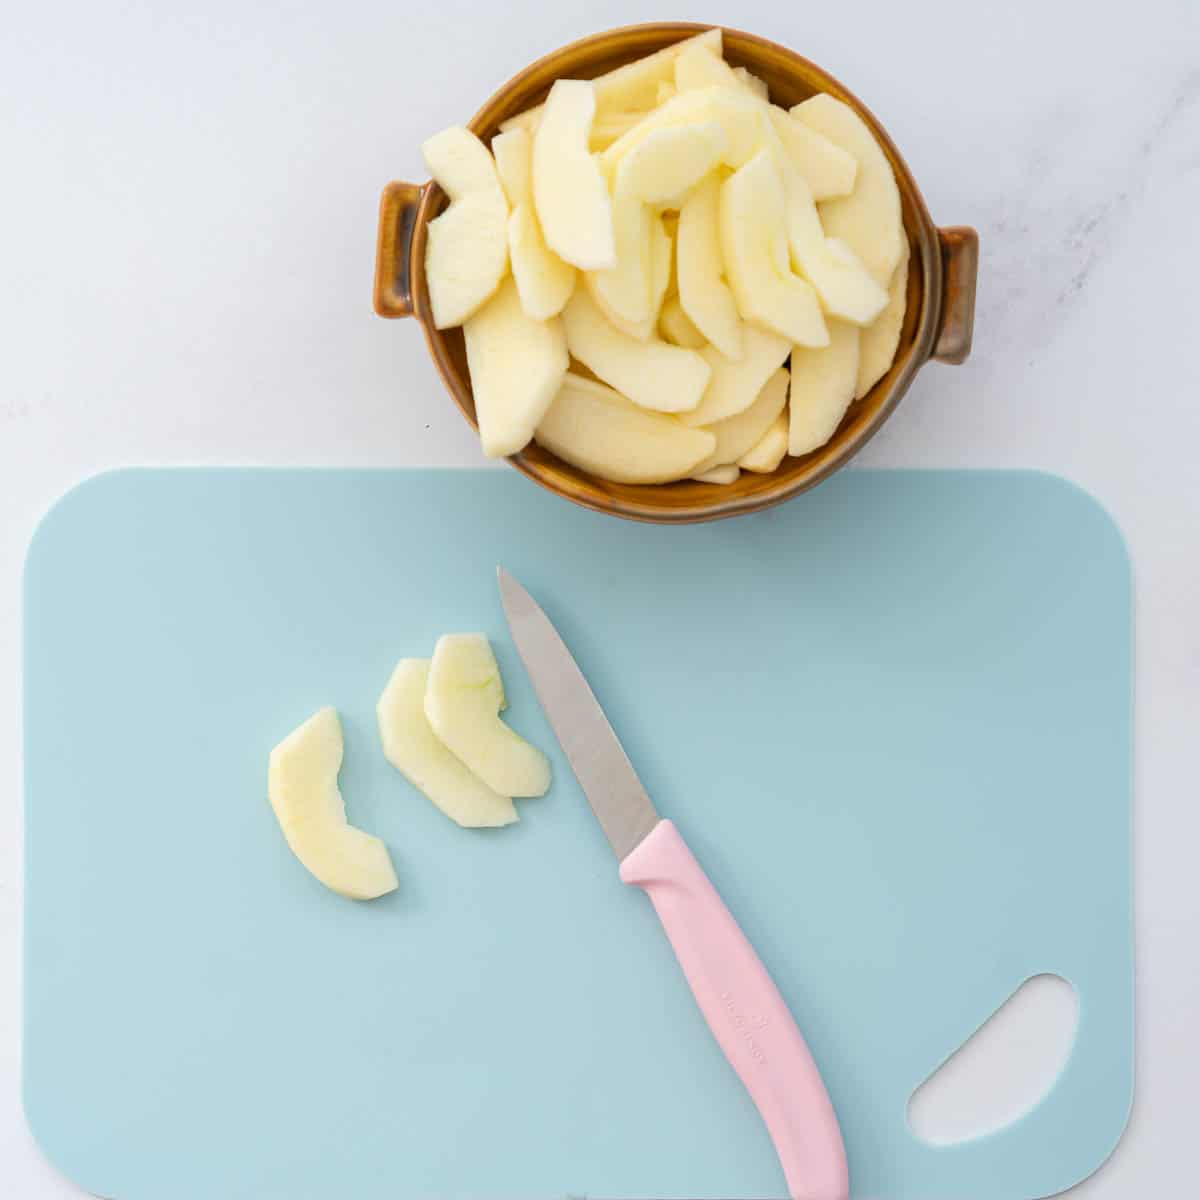 Peeled and cored apple slices in a brown bowl, next to a light blue chopping board and pink handled paring knife.